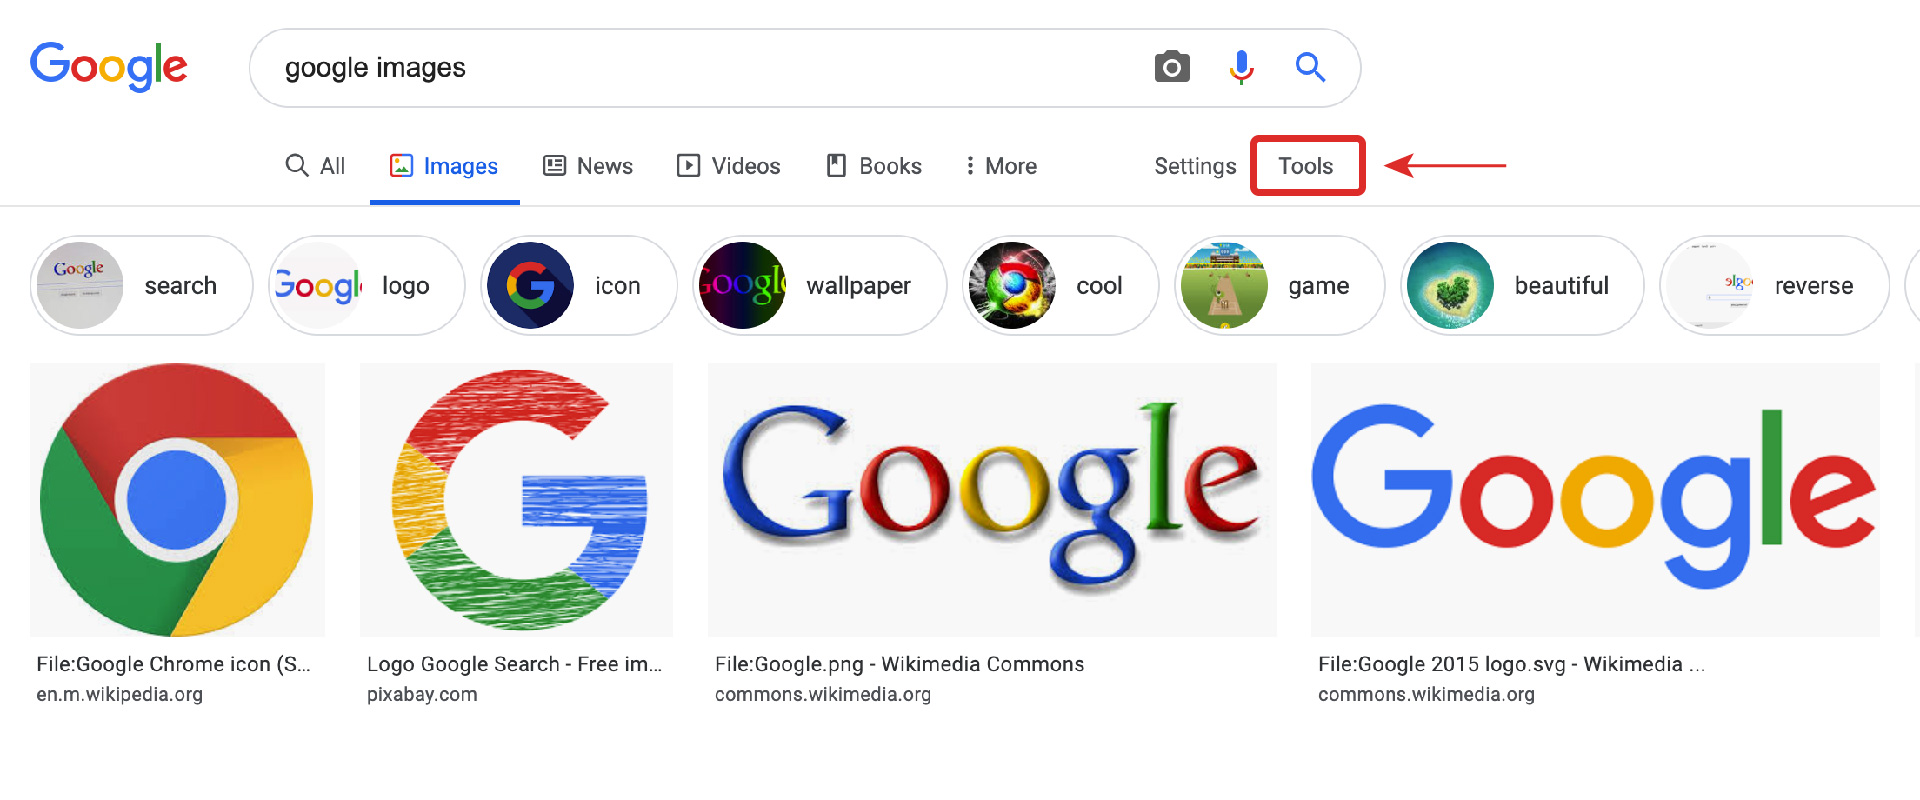 Screenshot of Google Image search results, with the "Tools" button highlighted.